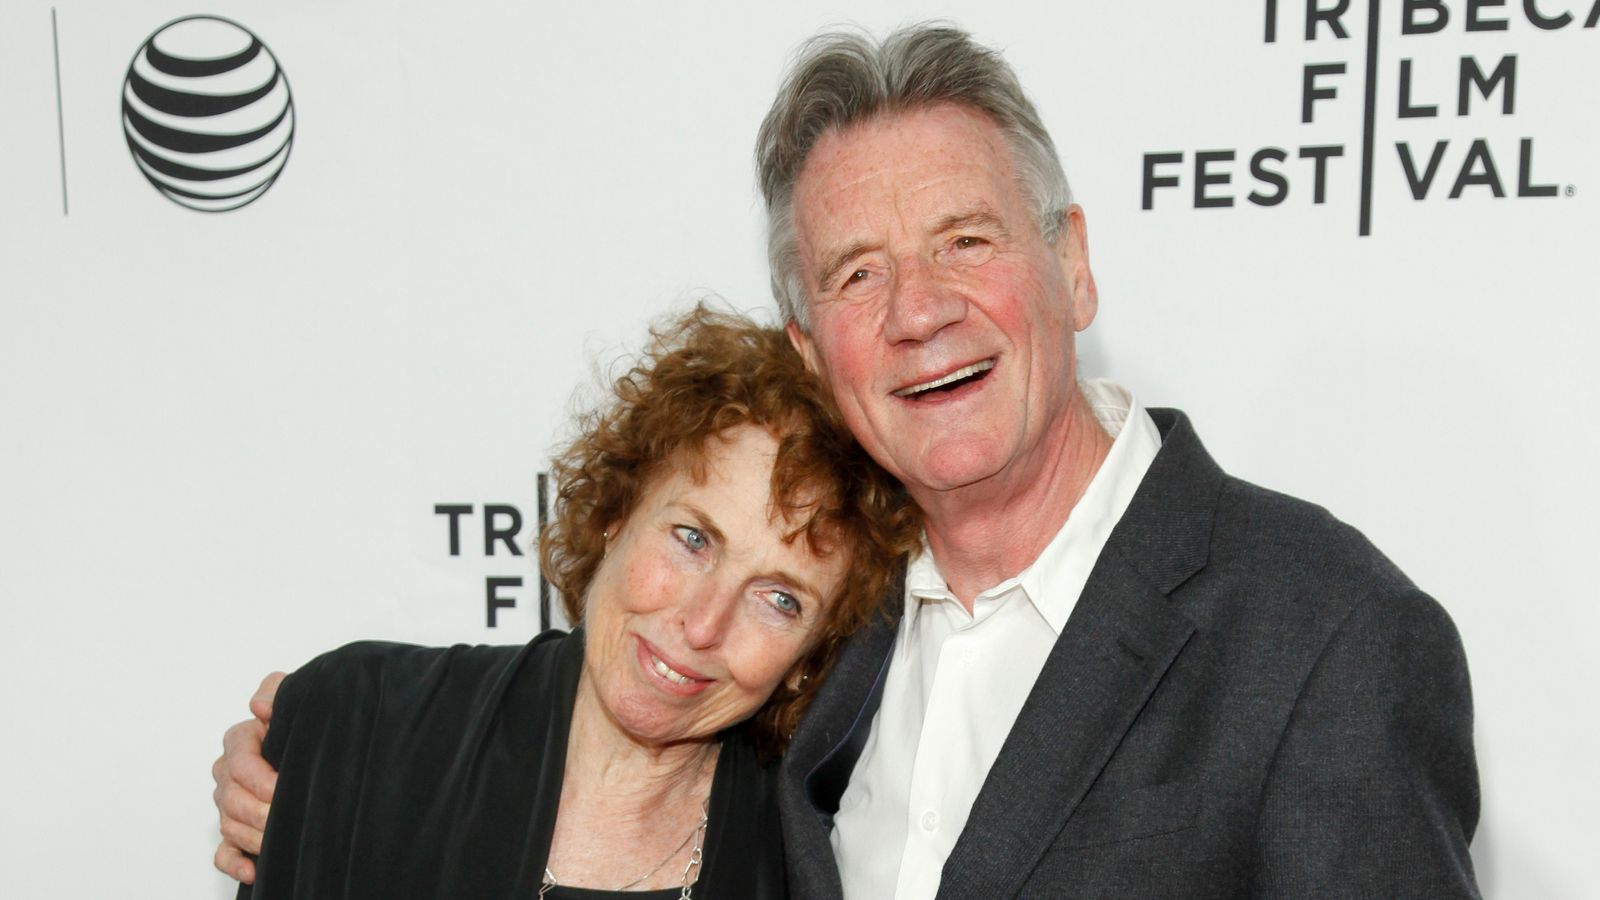 Michael Palin's wife of 57 years dies: Monty Python star says she was 'bedrock of my life'